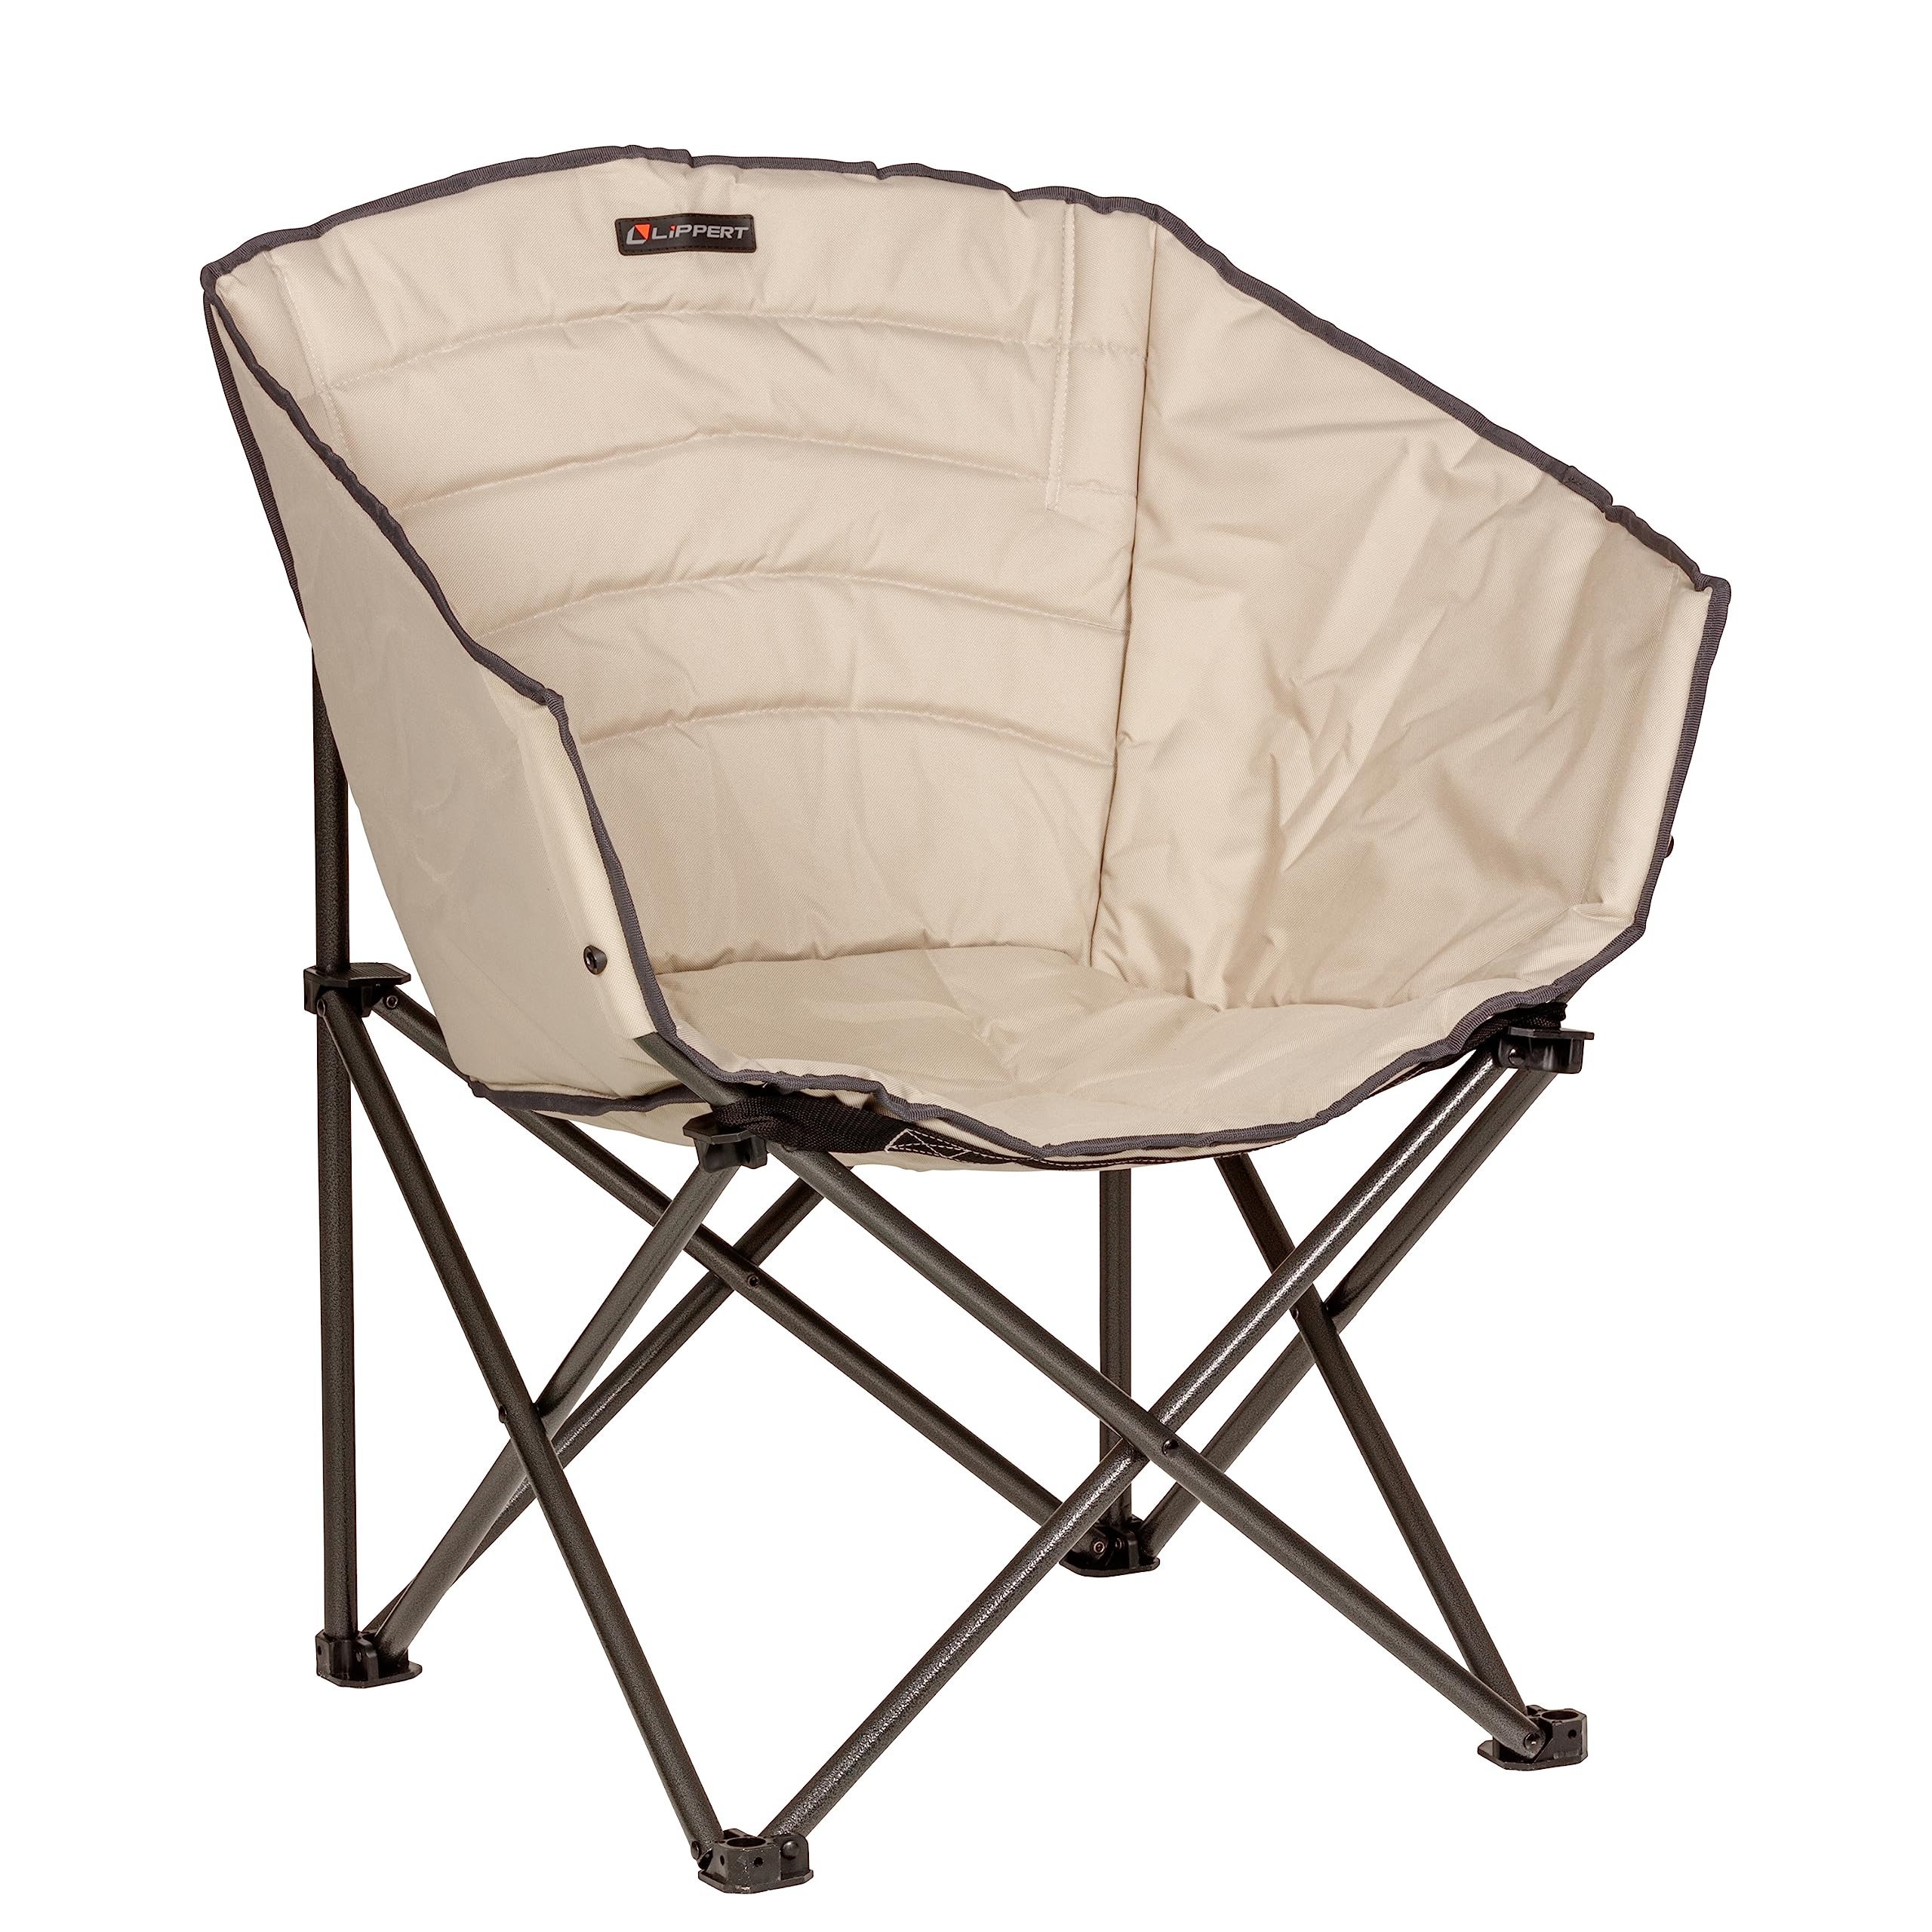 CAMPFIRE PADDED BARREL CHAIR SAND